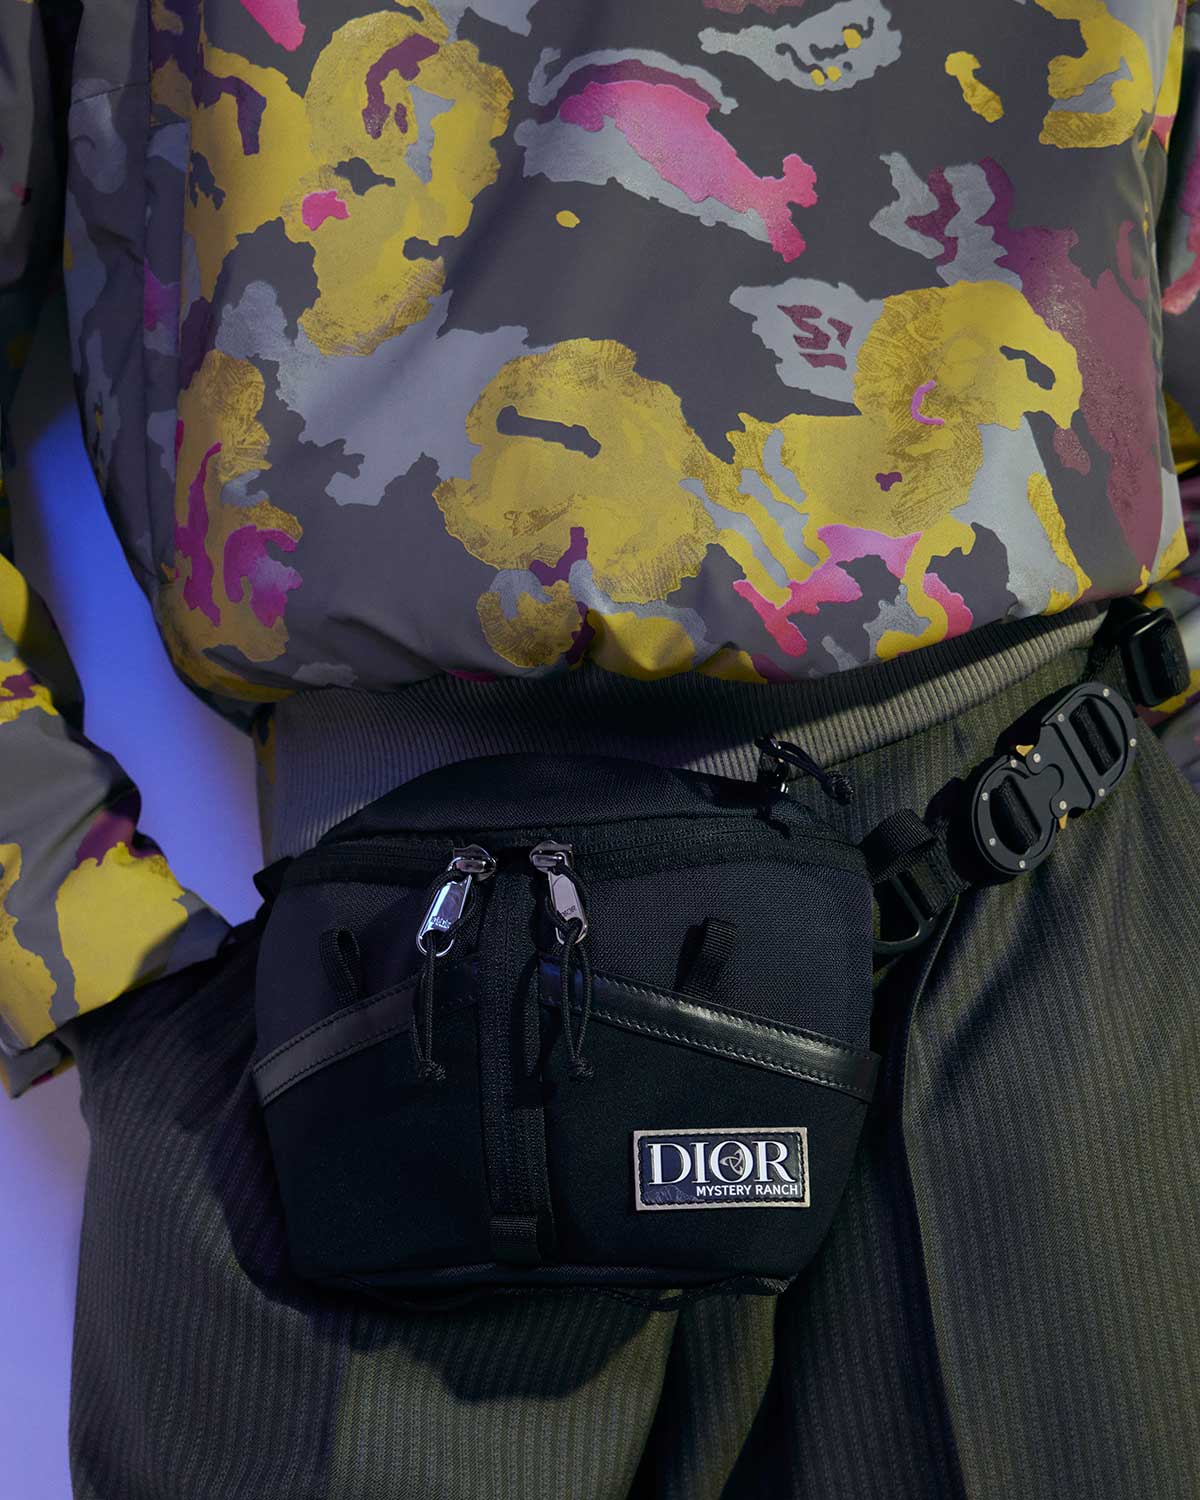 Dior Drops Suprise Collab With Mystery Ranch Backpacks